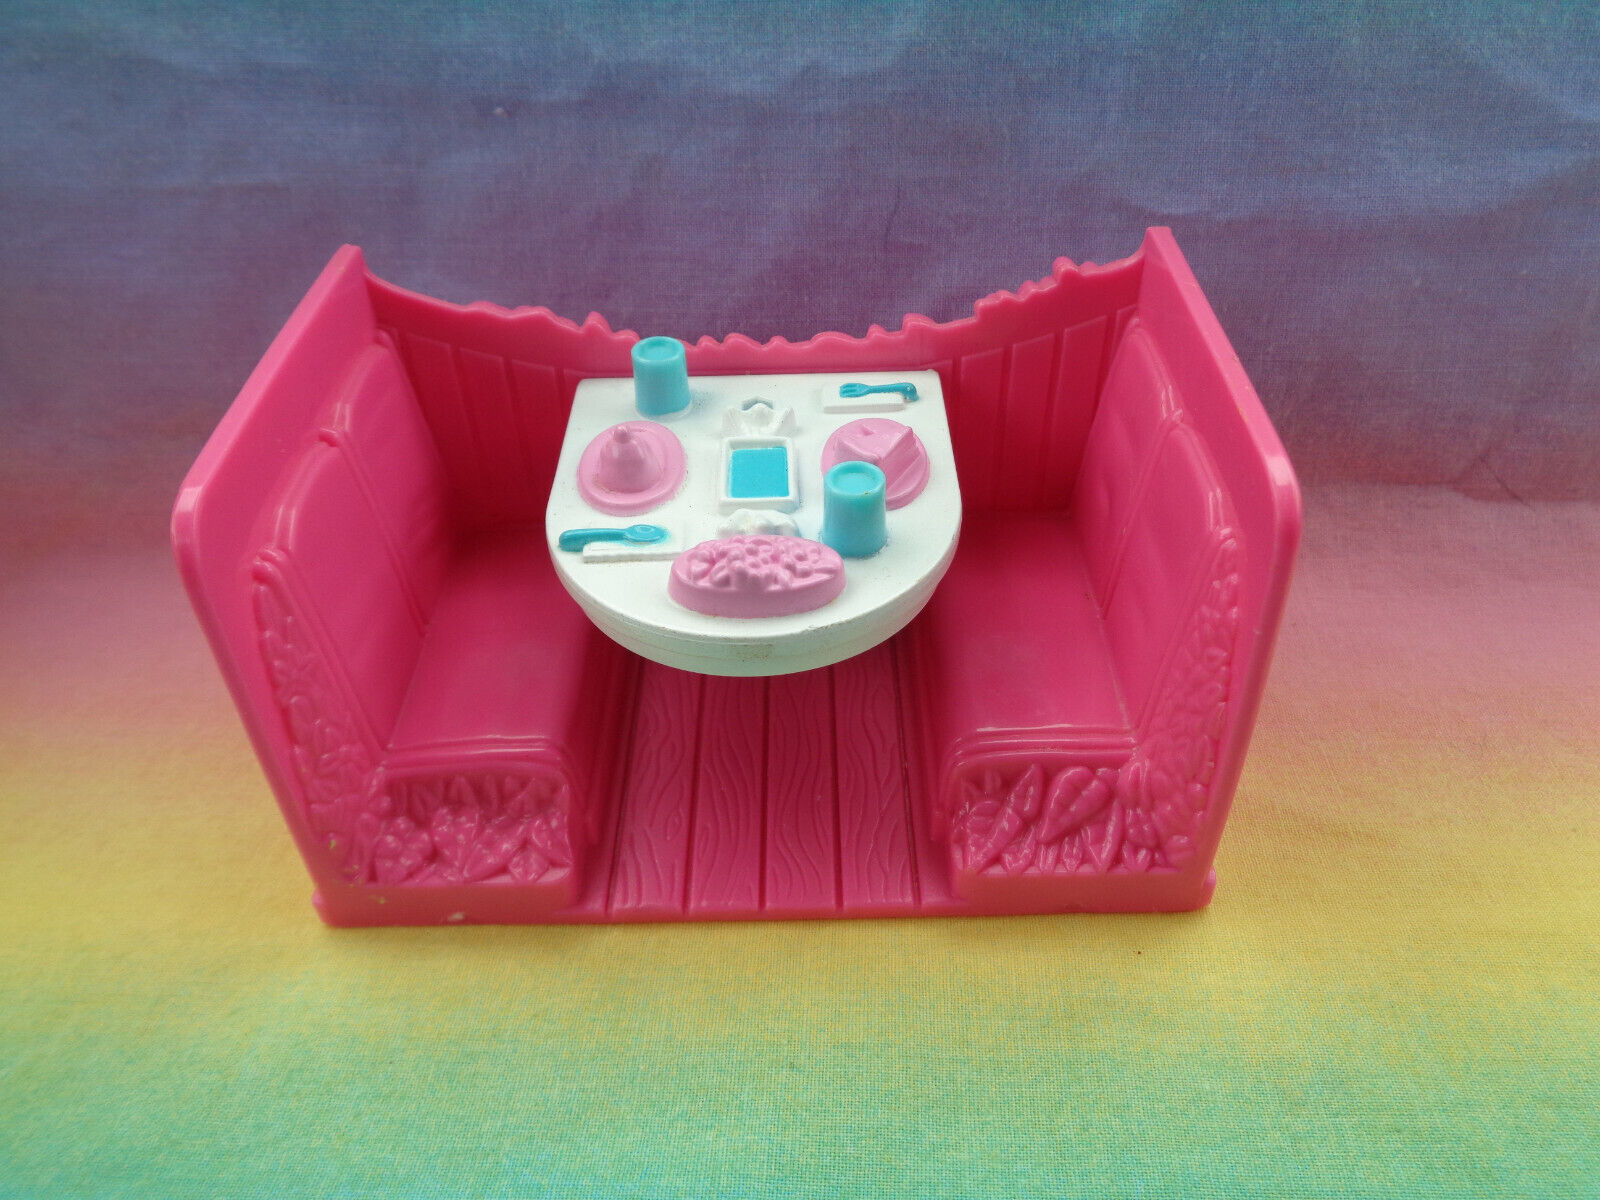 2001 Mattel Polly Pocket Pink Booth With Set Table Dollhouse Accessory - $16.82